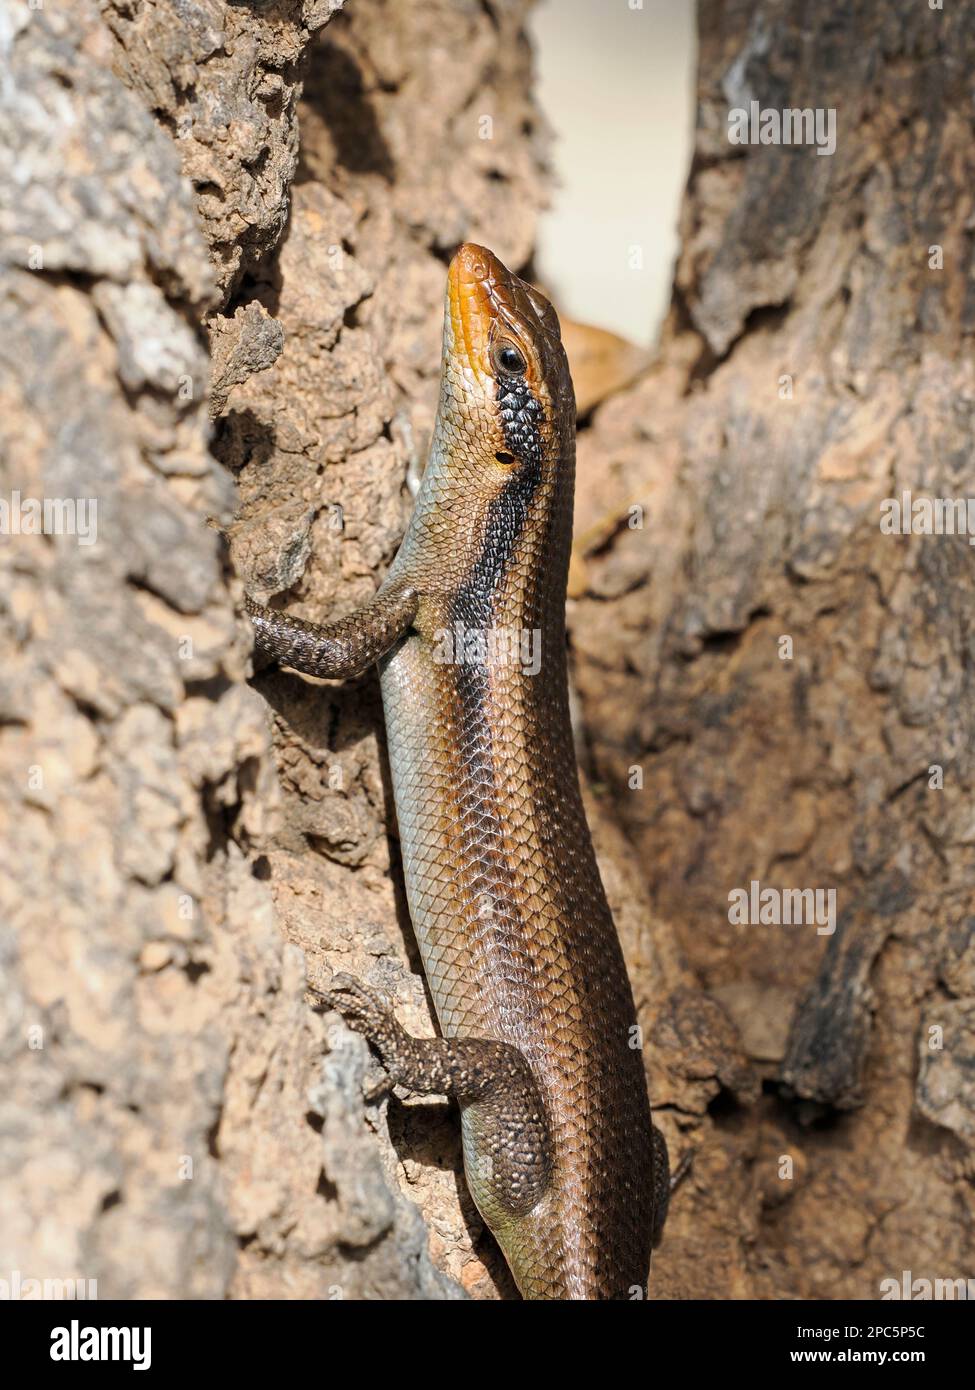 Wahlberg’s Skink (Trachylepis wahlbergii) adult resting in crevice in tree, Namibia, January Stock Photo